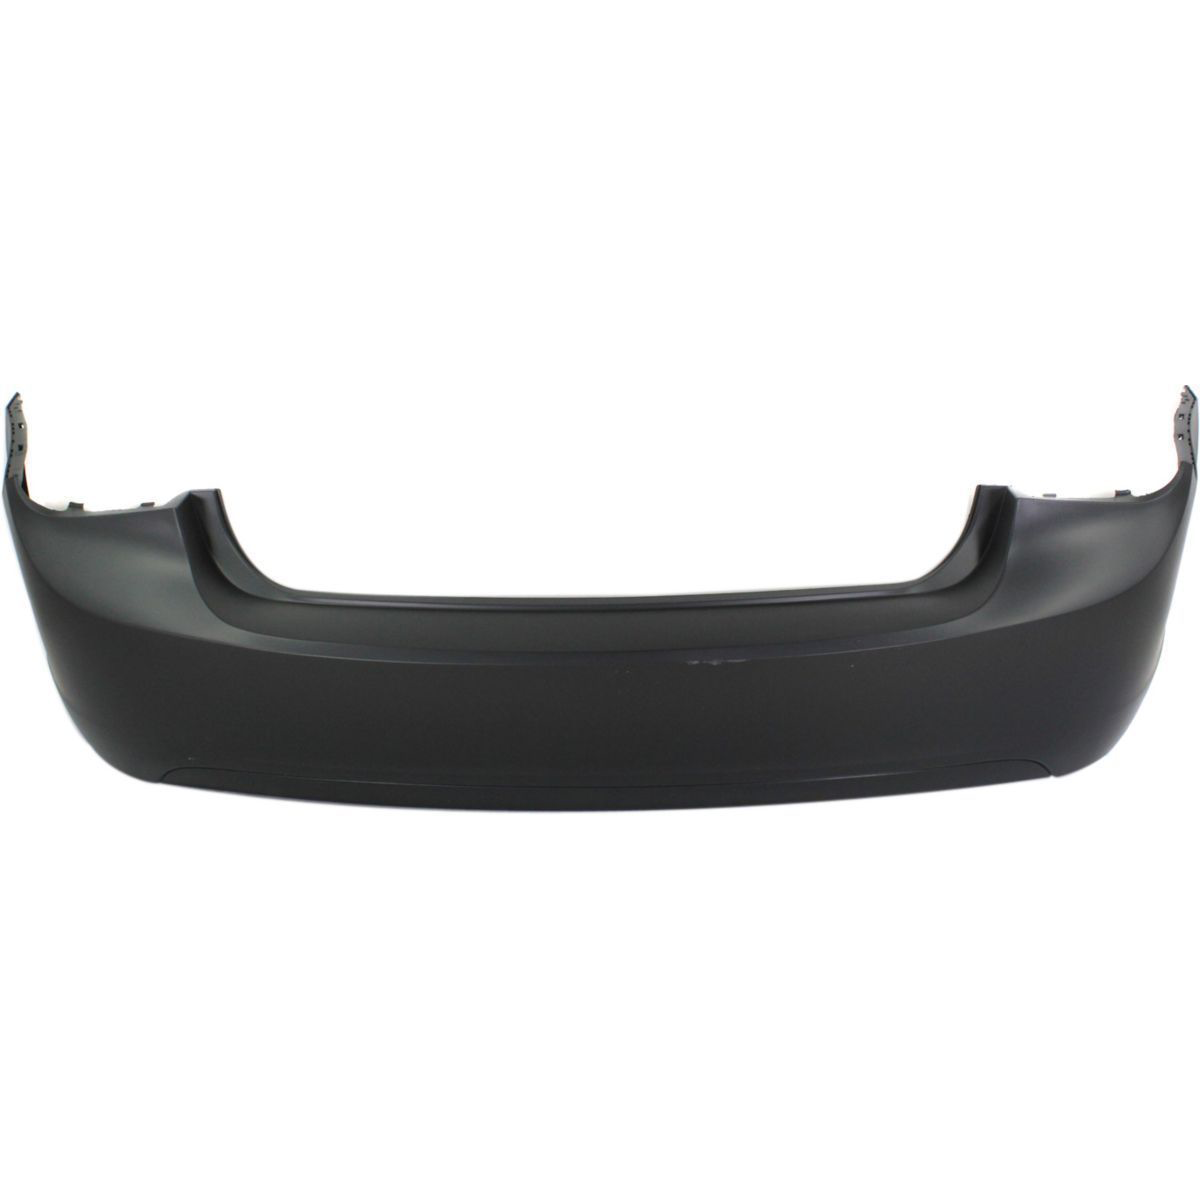 2011-2015 CHEVY CRUZE Rear Bumper Cover w/o RS Pkg  w/o Rear Object Sensor Painted to Match